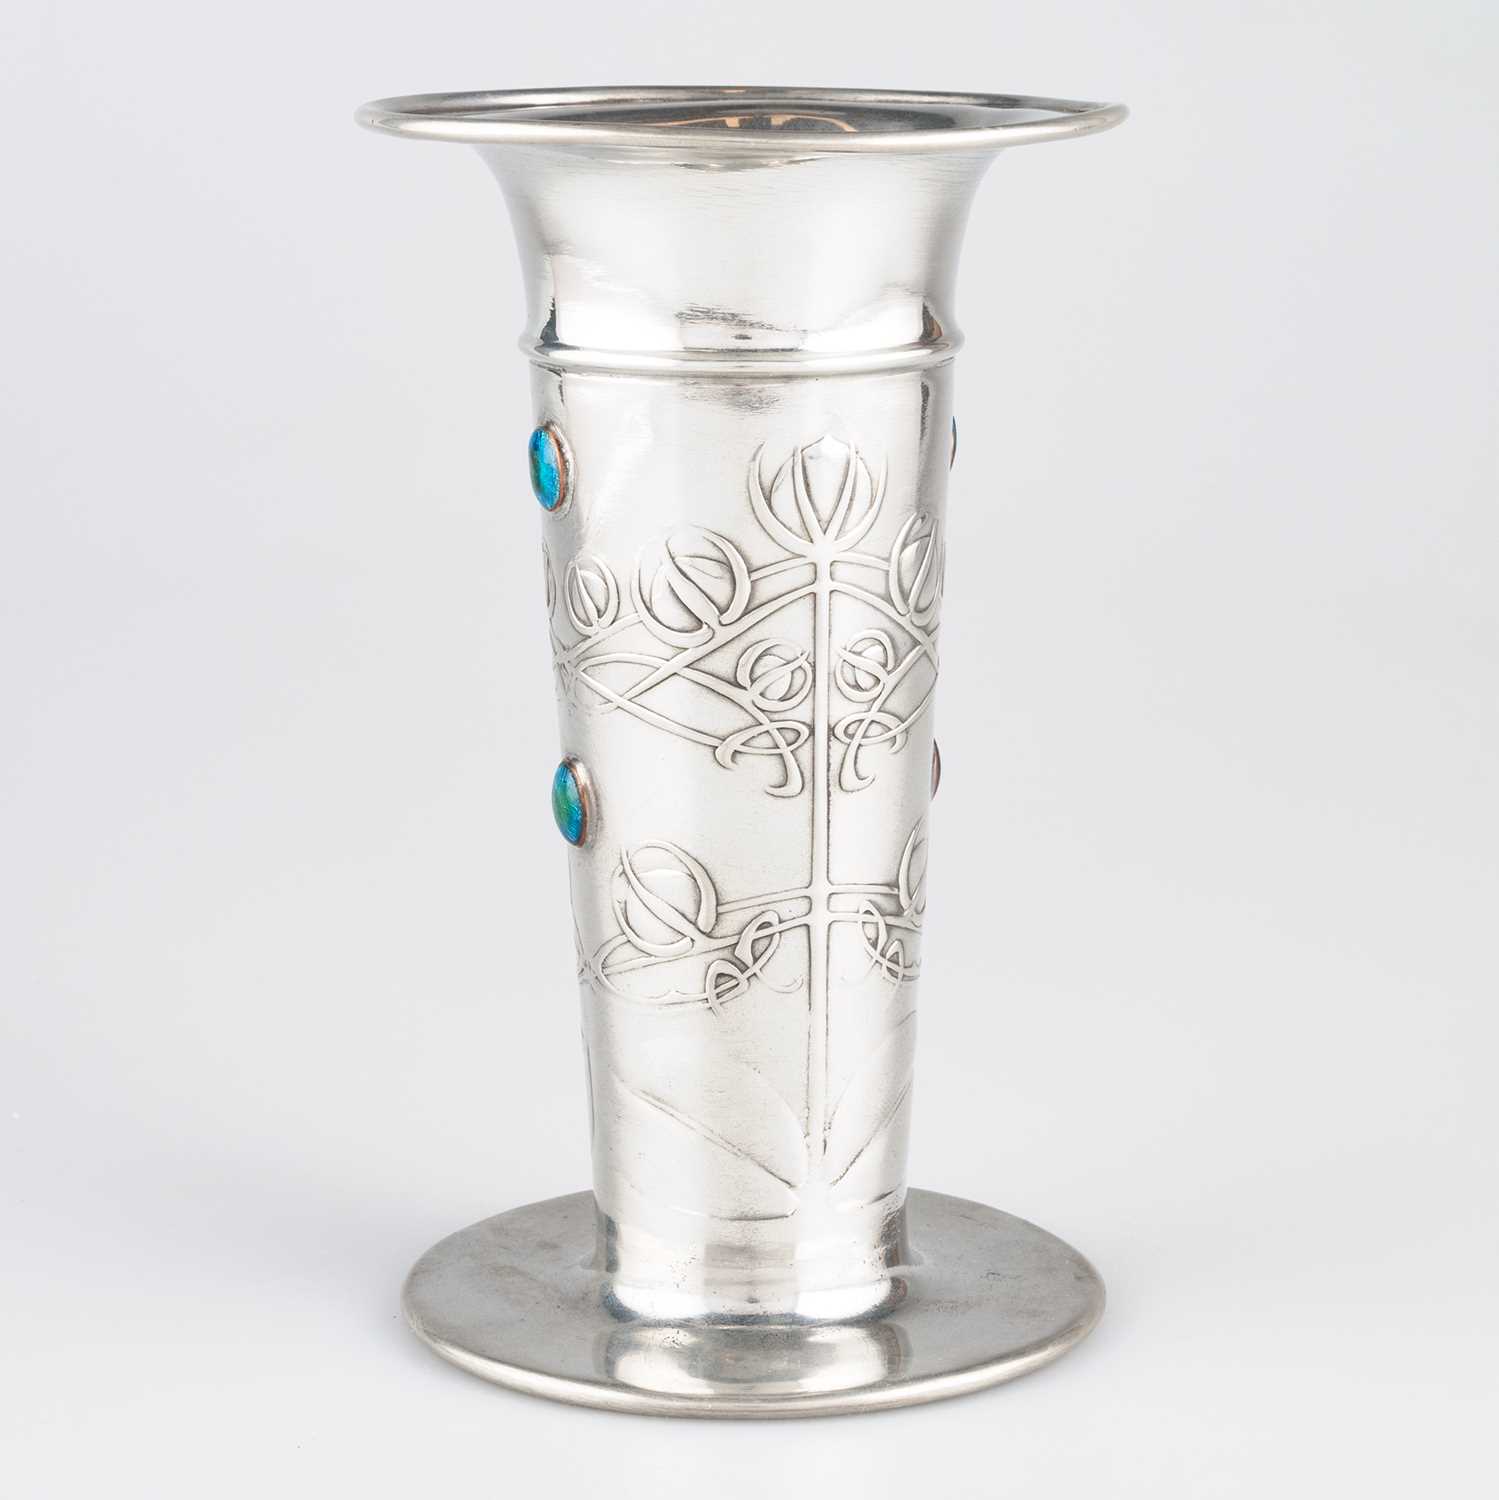 ARCHIBALD KNOX (1864-1933) FOR LIBERTY & CO, A TUDRIC PEWTER AND ENAMEL VASE